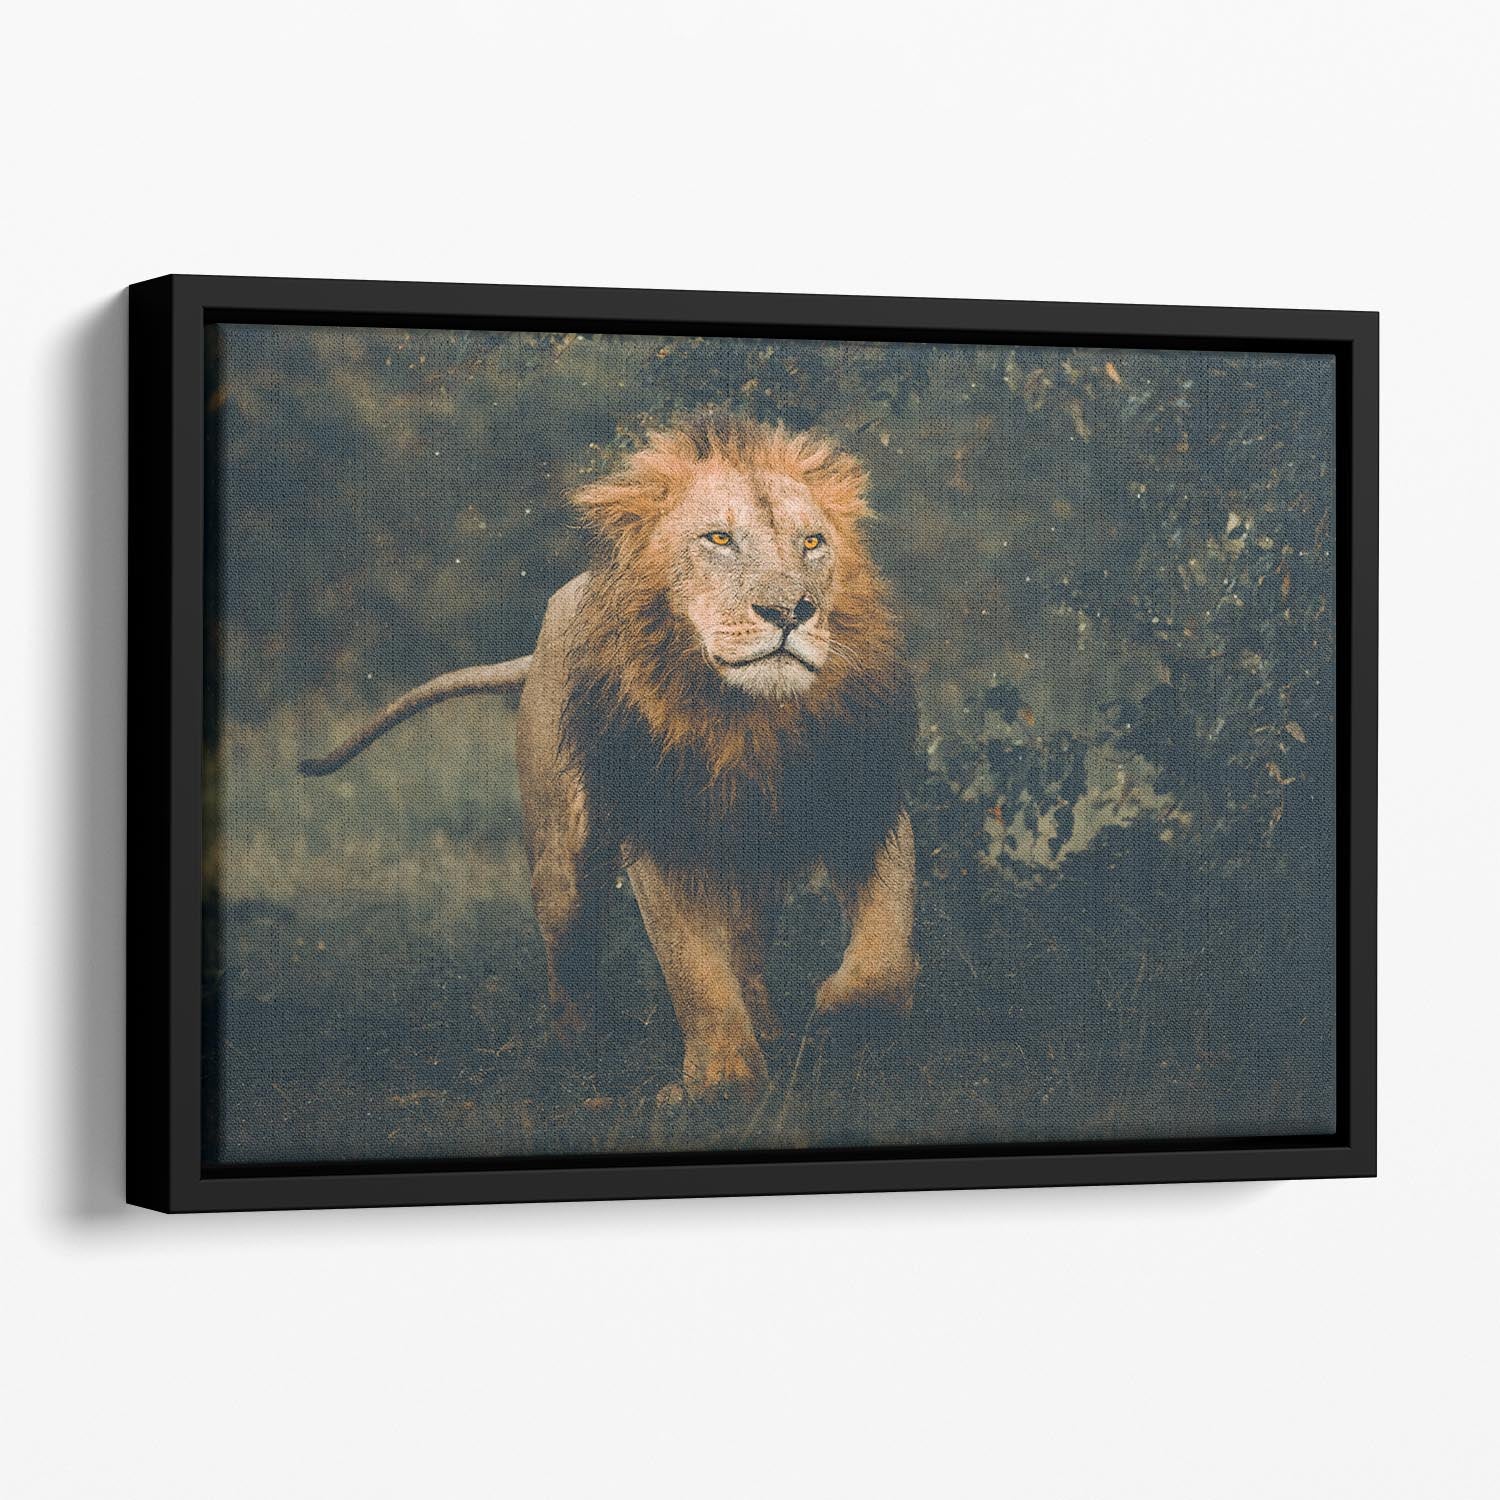 Lion Running In The Woods Floating Framed Canvas - Canvas Art Rocks - 1